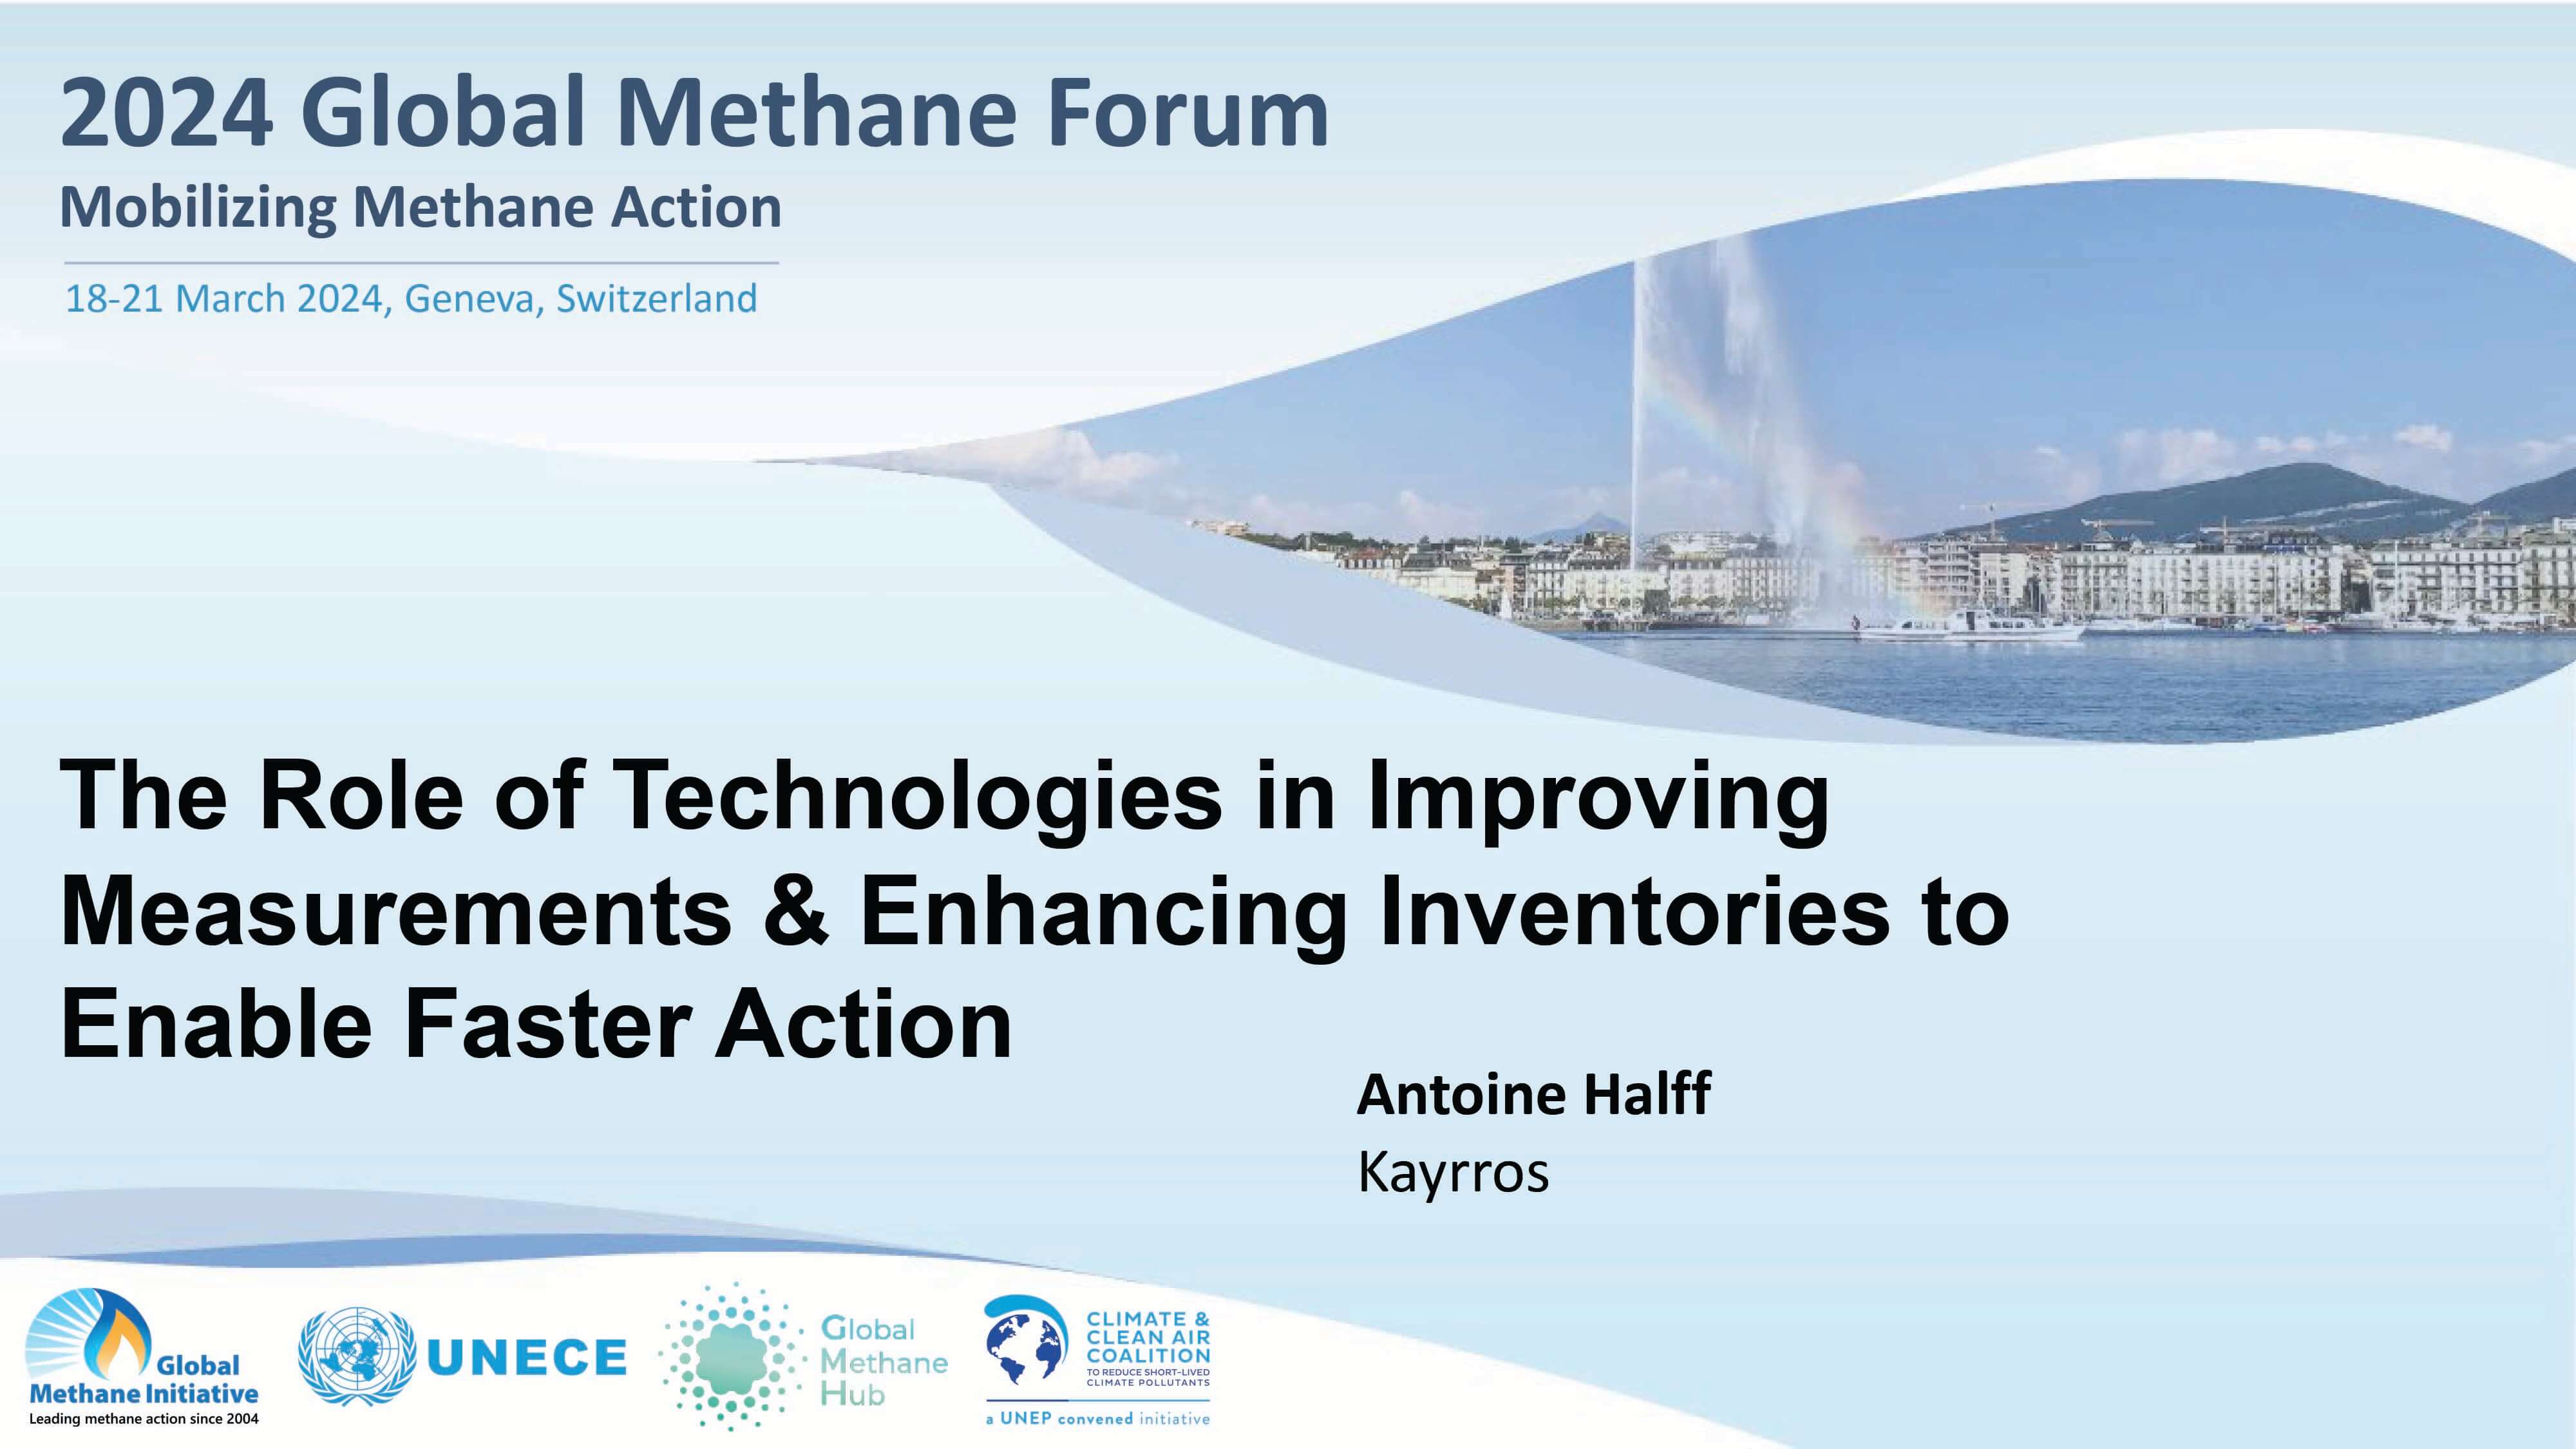 The Role of Technologies in Improving Measurements & Enhancing Inventories to Enable Faster Action